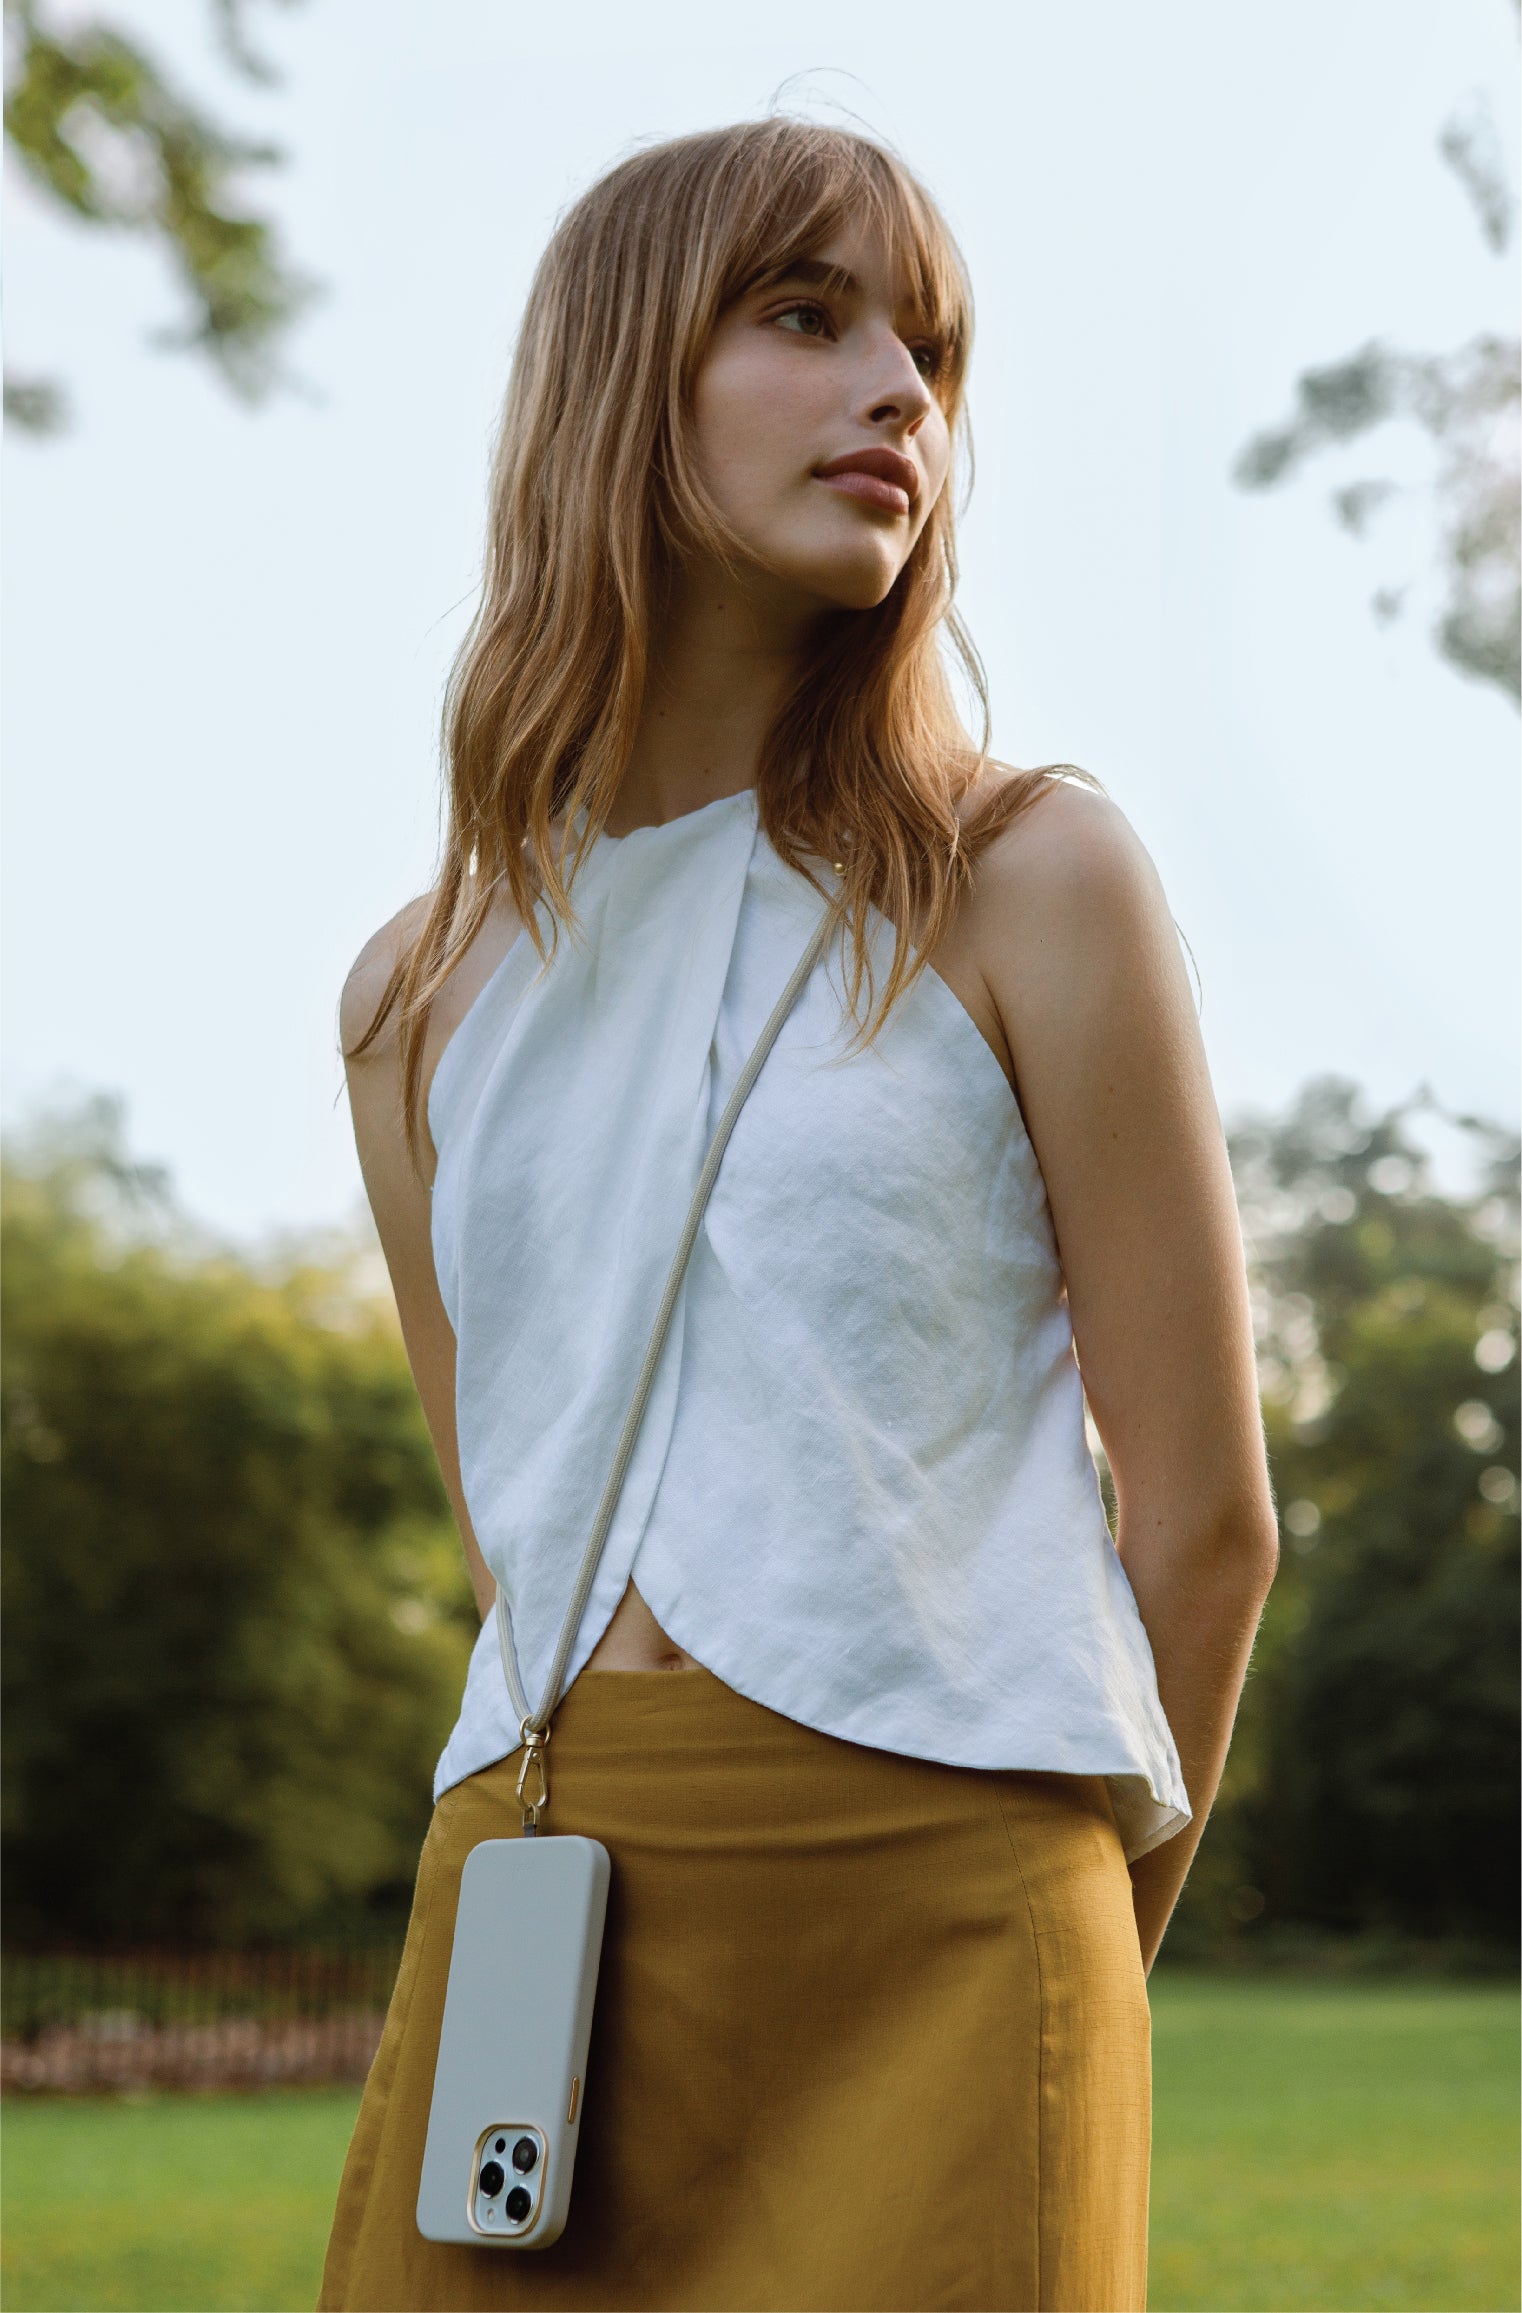 Woman with white top and brown skirt using strap phone case